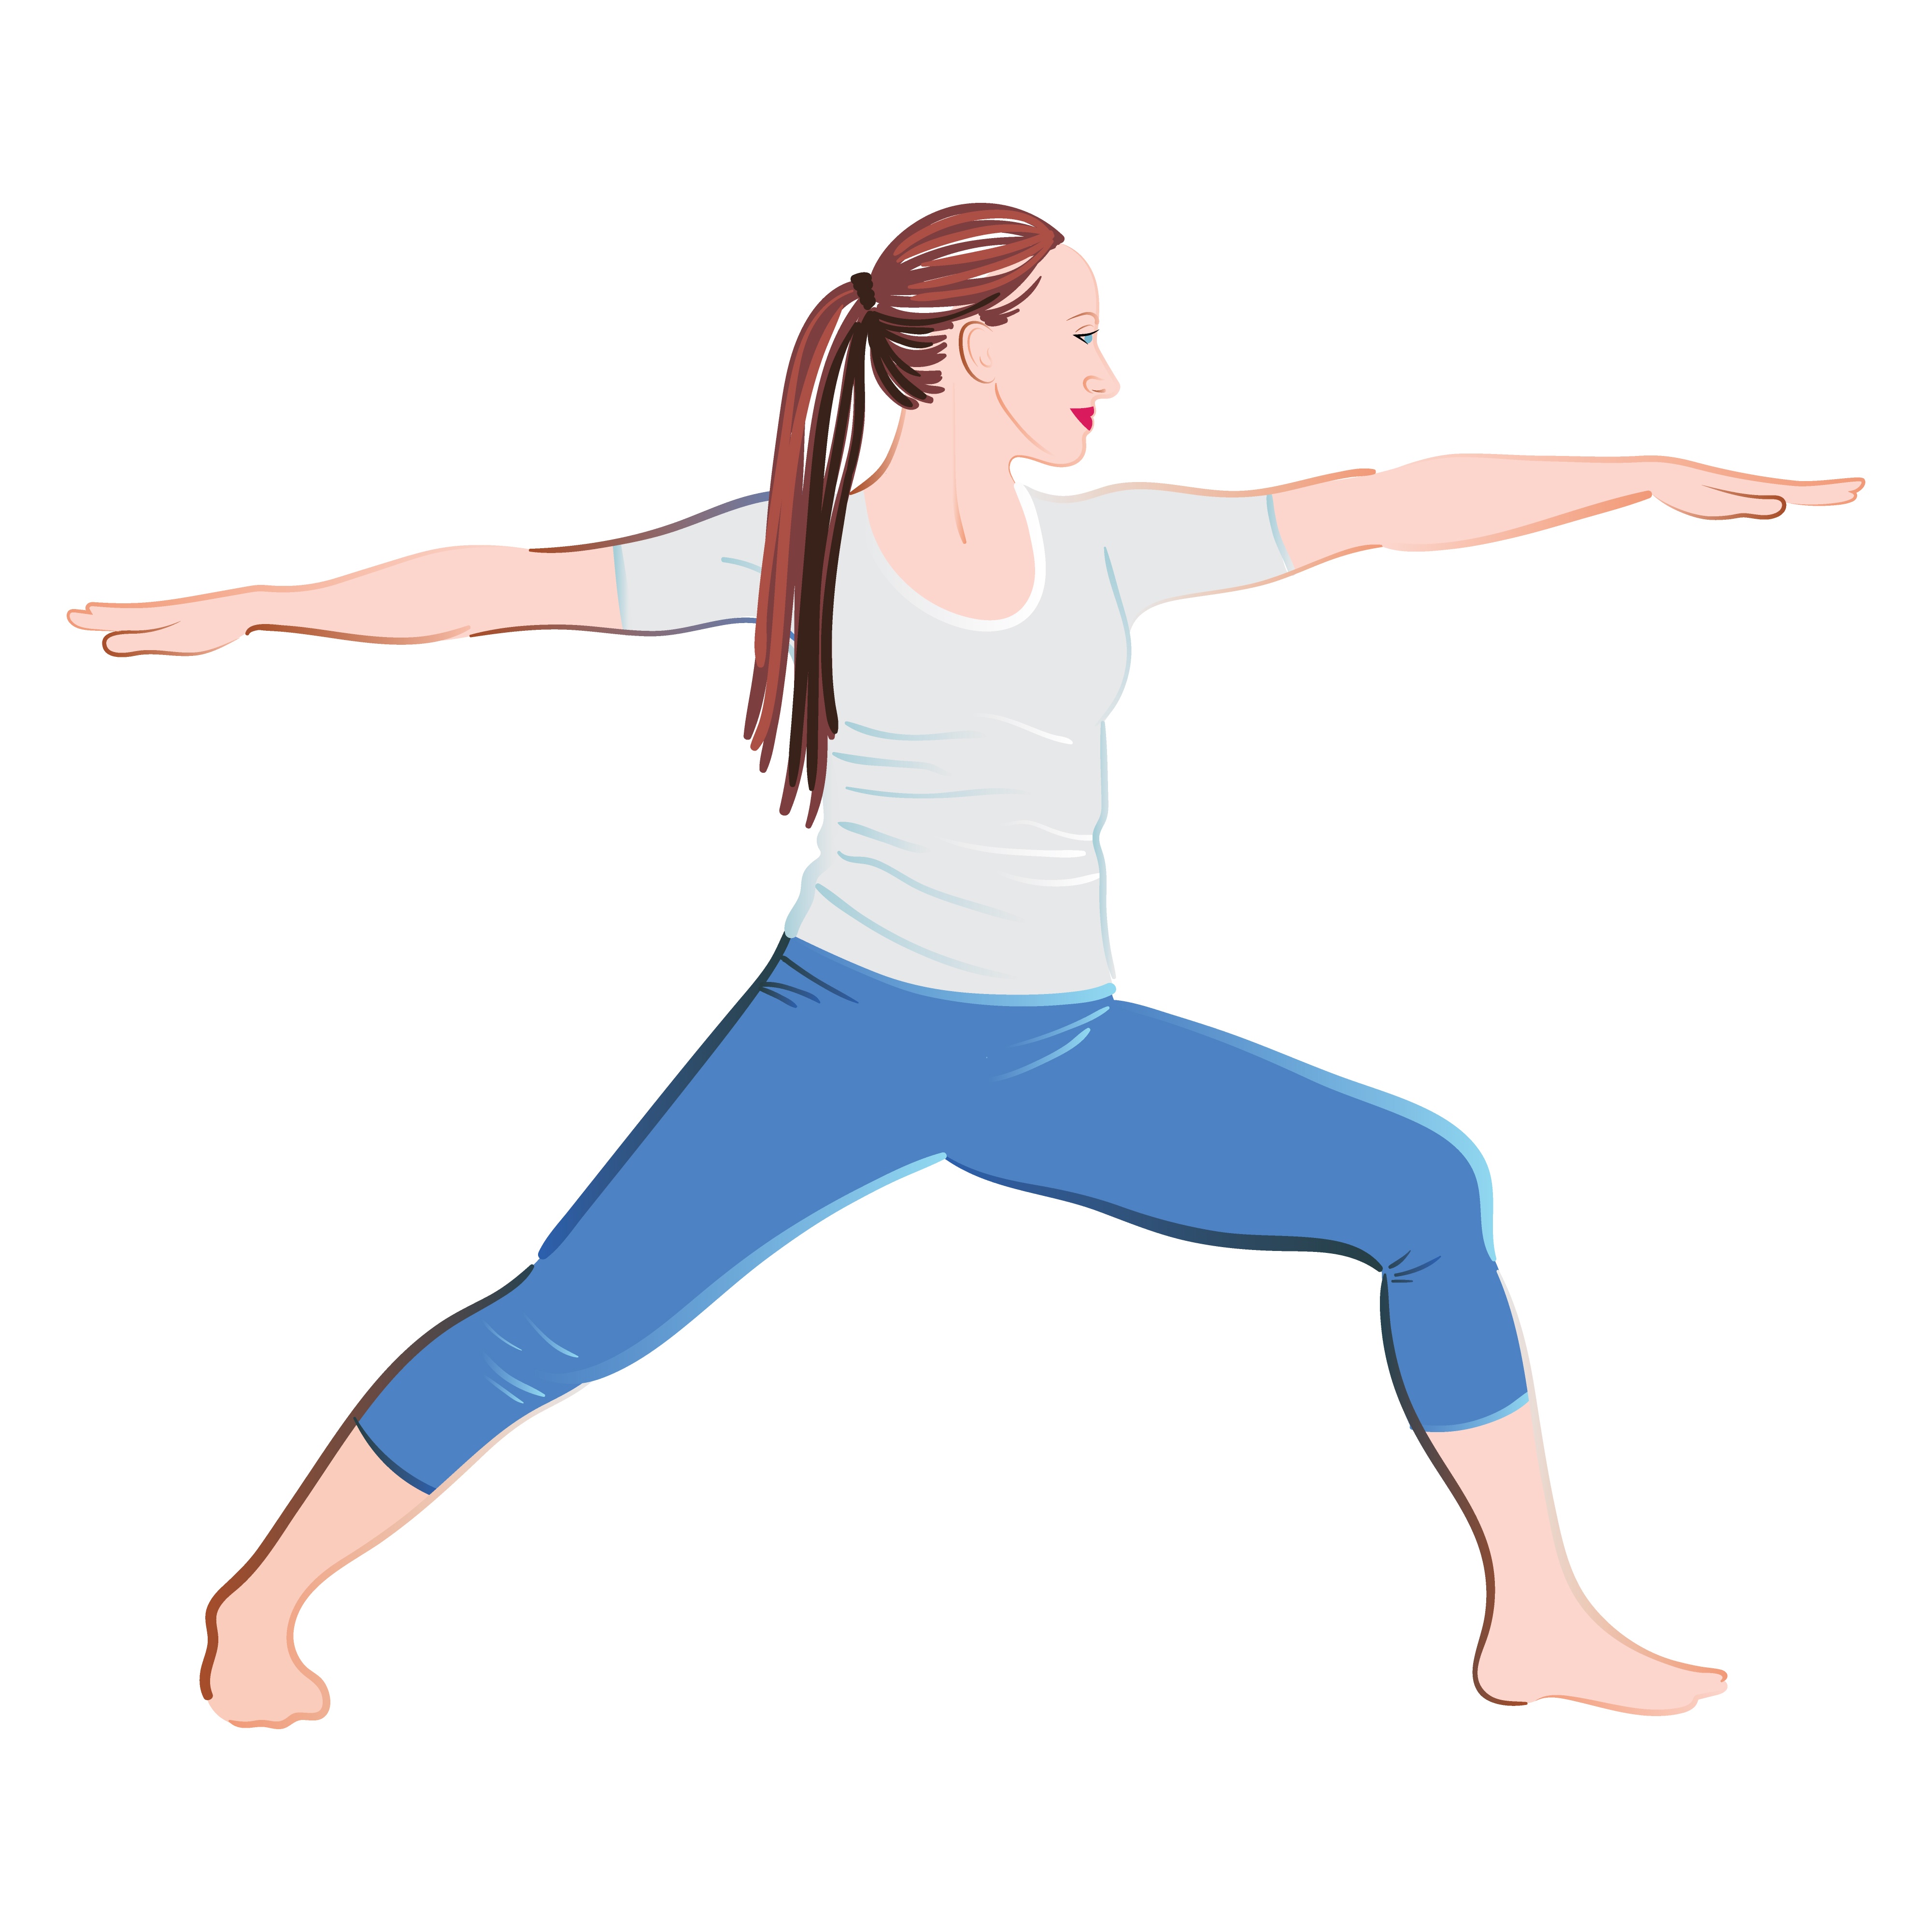 4 Pose Variations to Challenge Your Strength